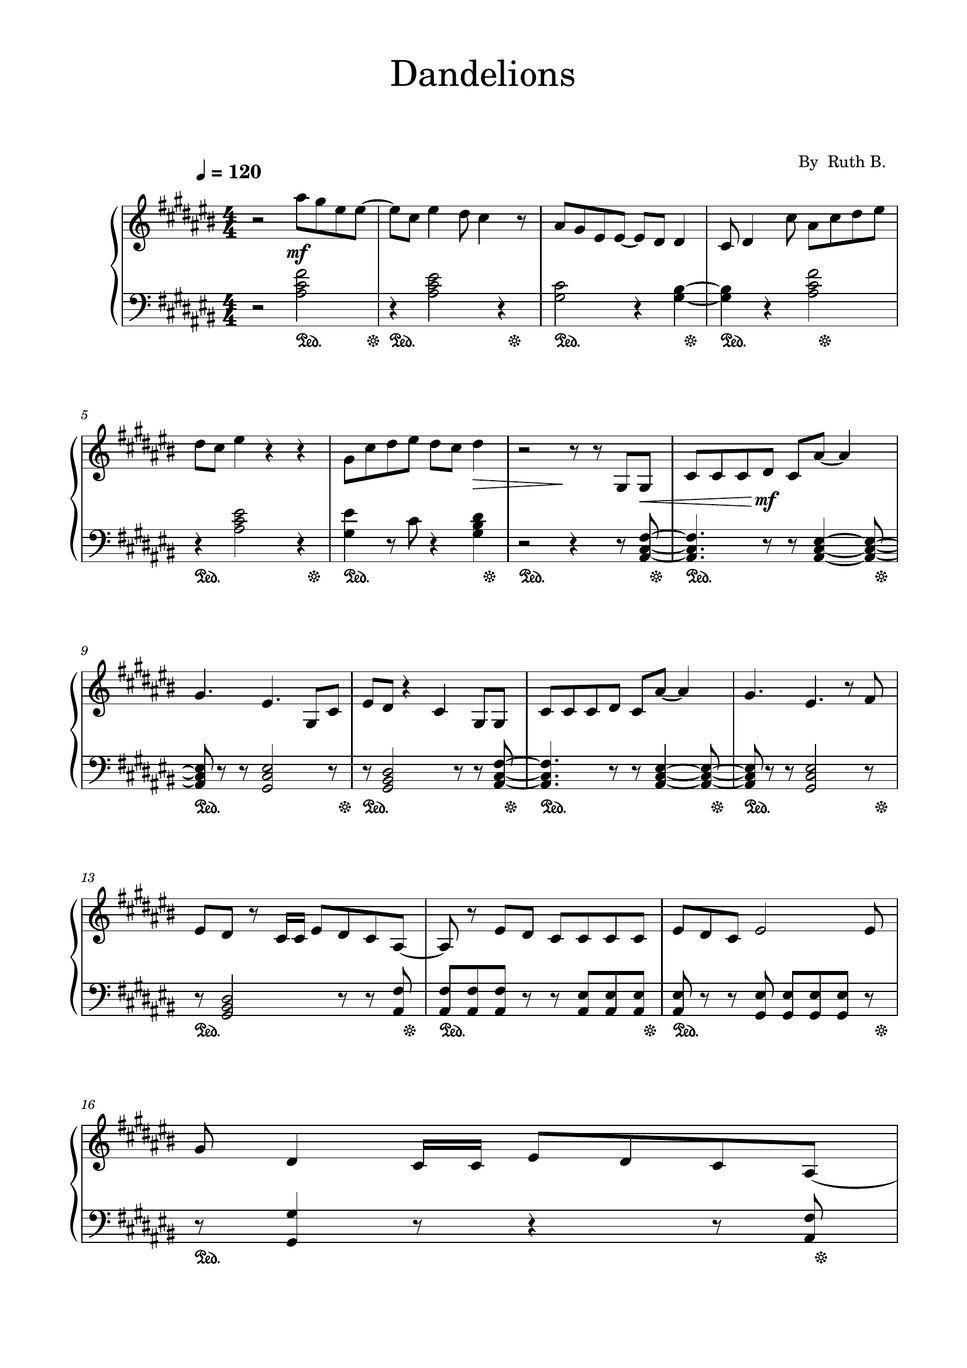 Ruth B. - Dandelions (Ruth B,Piano Solo Sheet Music) Spartito by poon